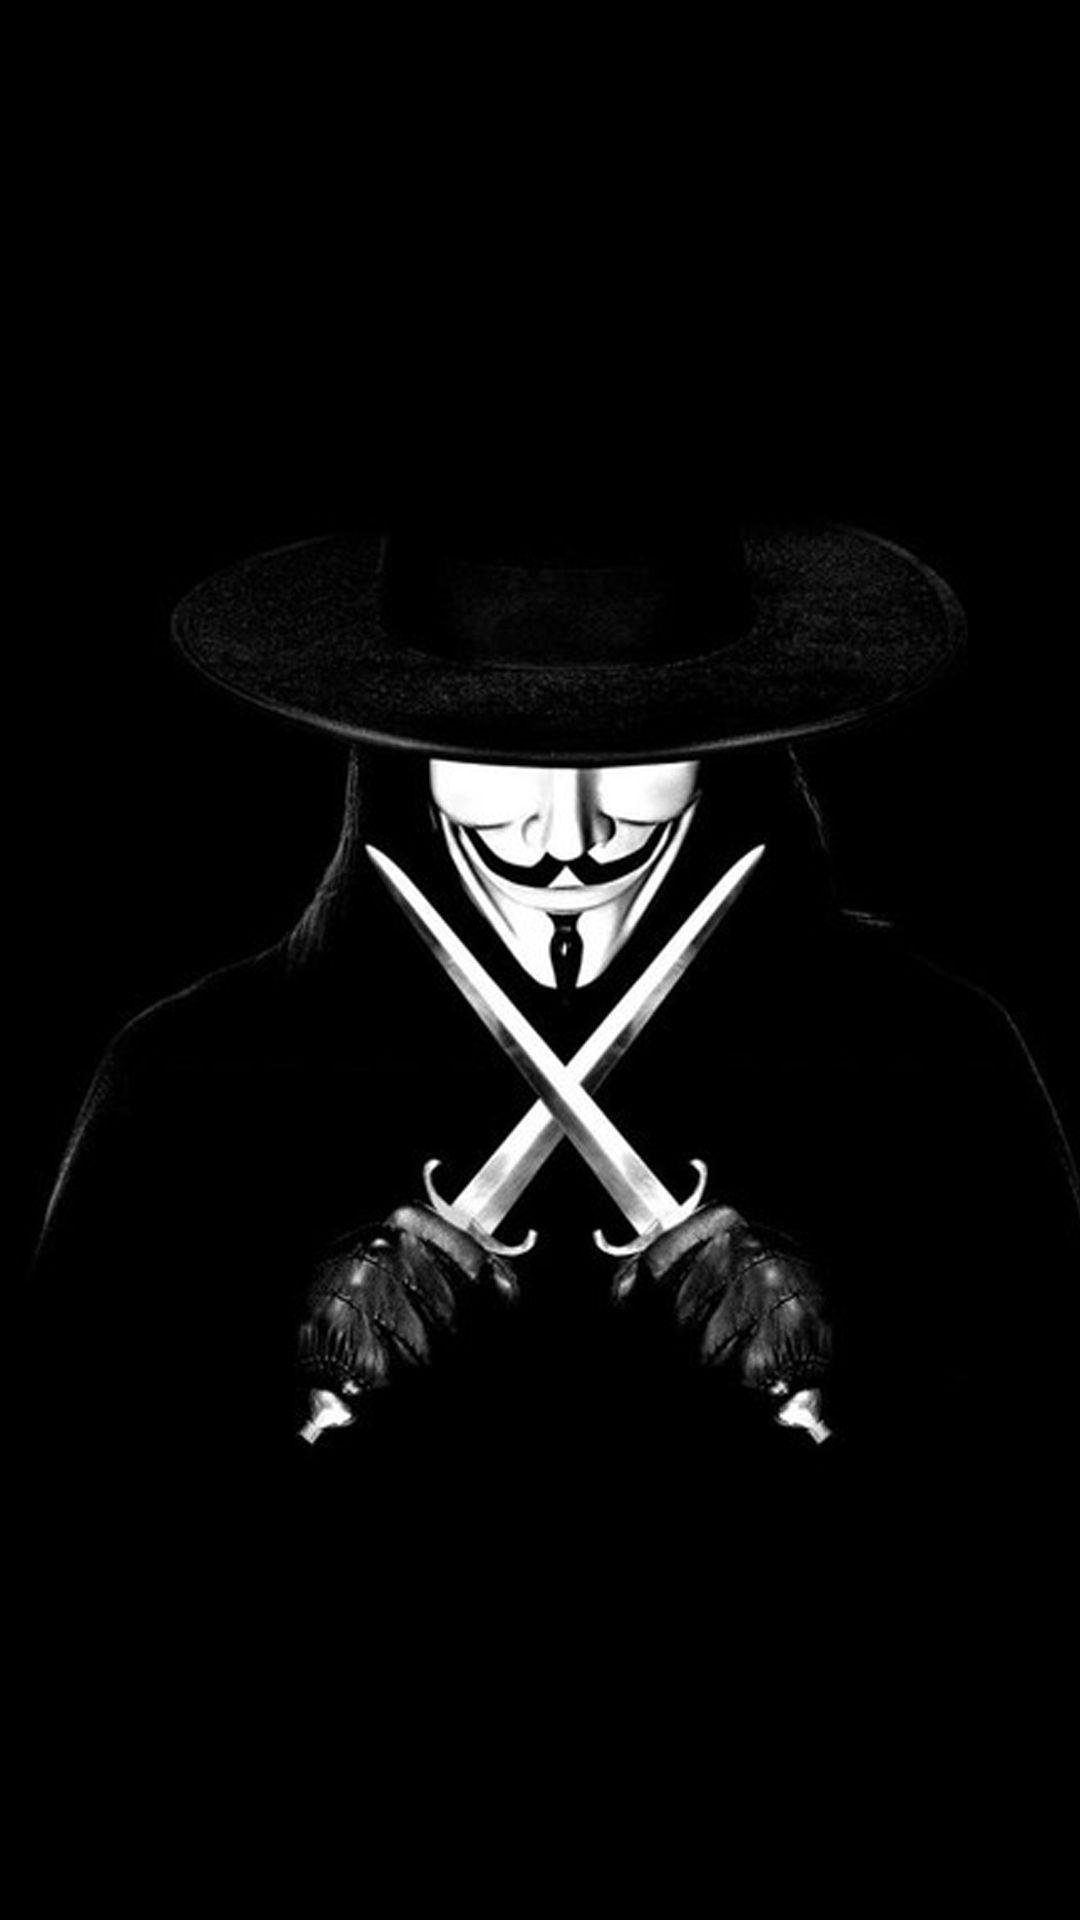 V for Vendetta #anonymous chan #hackers. iPhone 6 Wallpaper